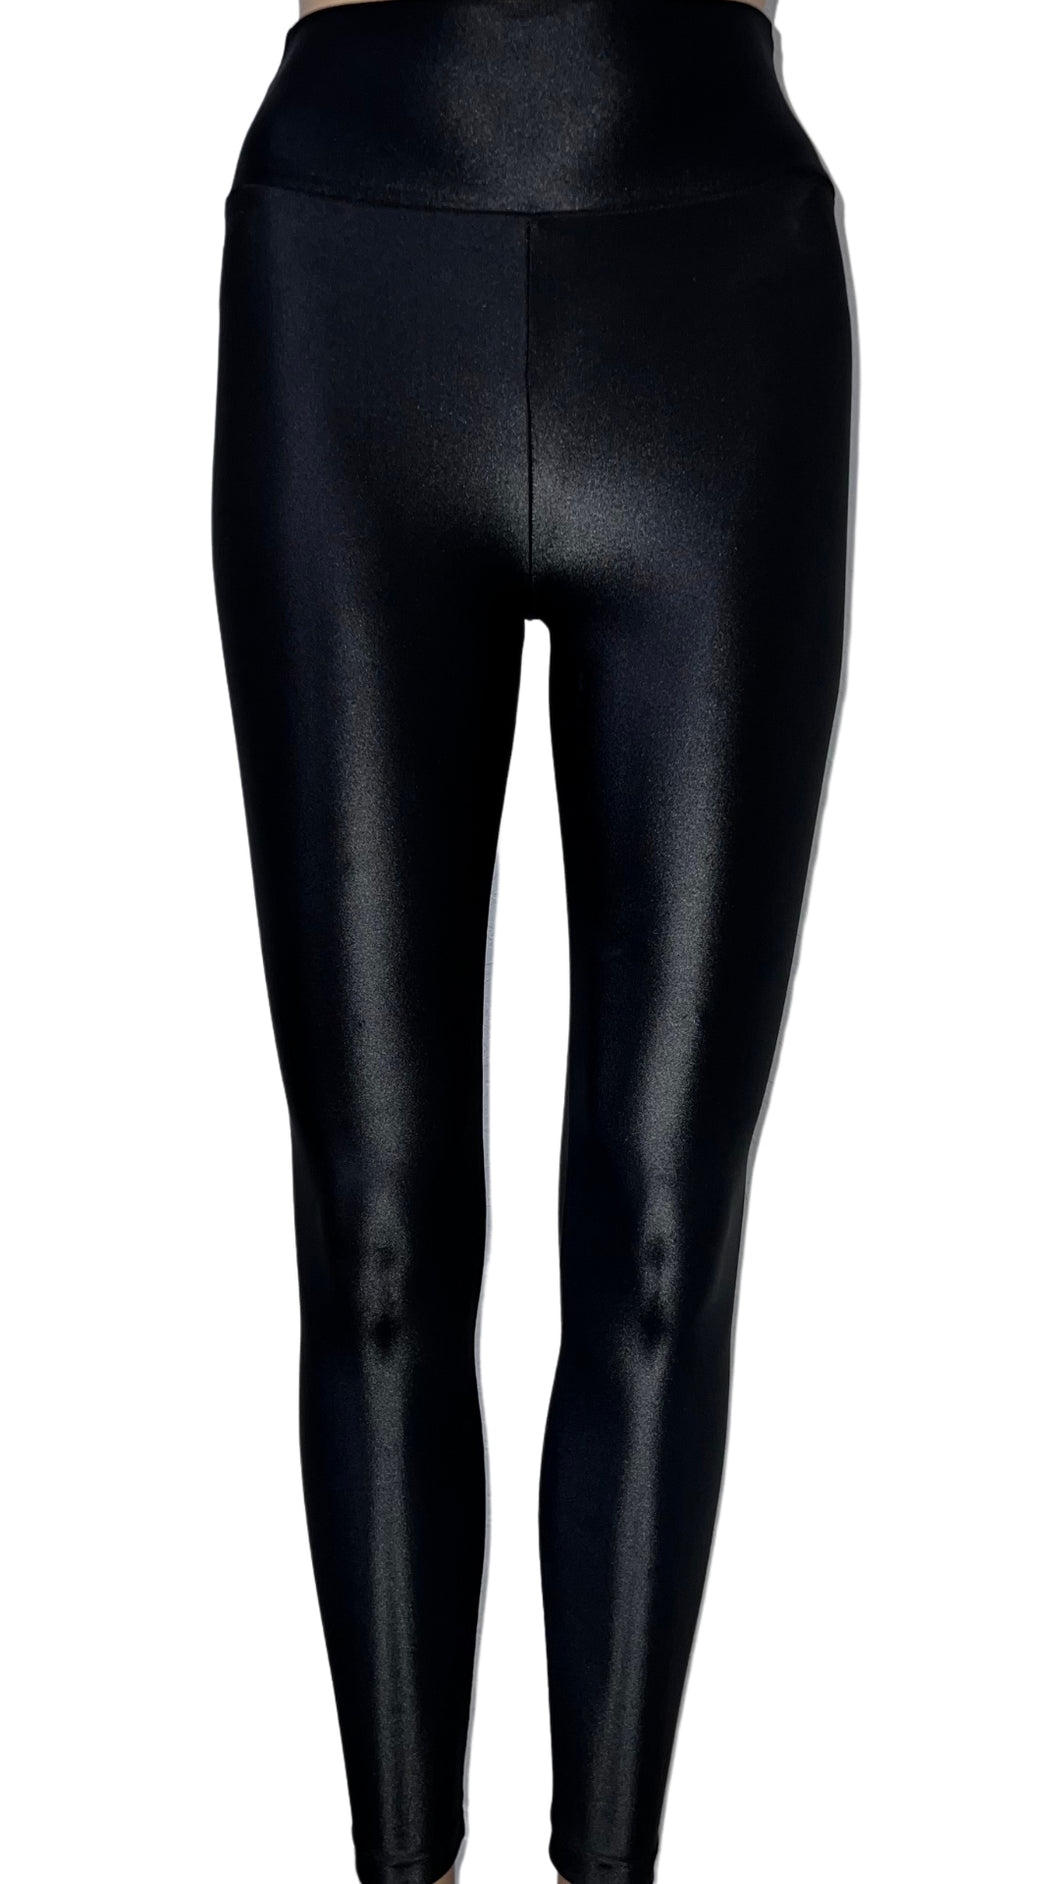 SAINT LAURENT Stretch-jersey stirrup leggings | Equestrian style outfit,  Stirrup leggings, All black outfit